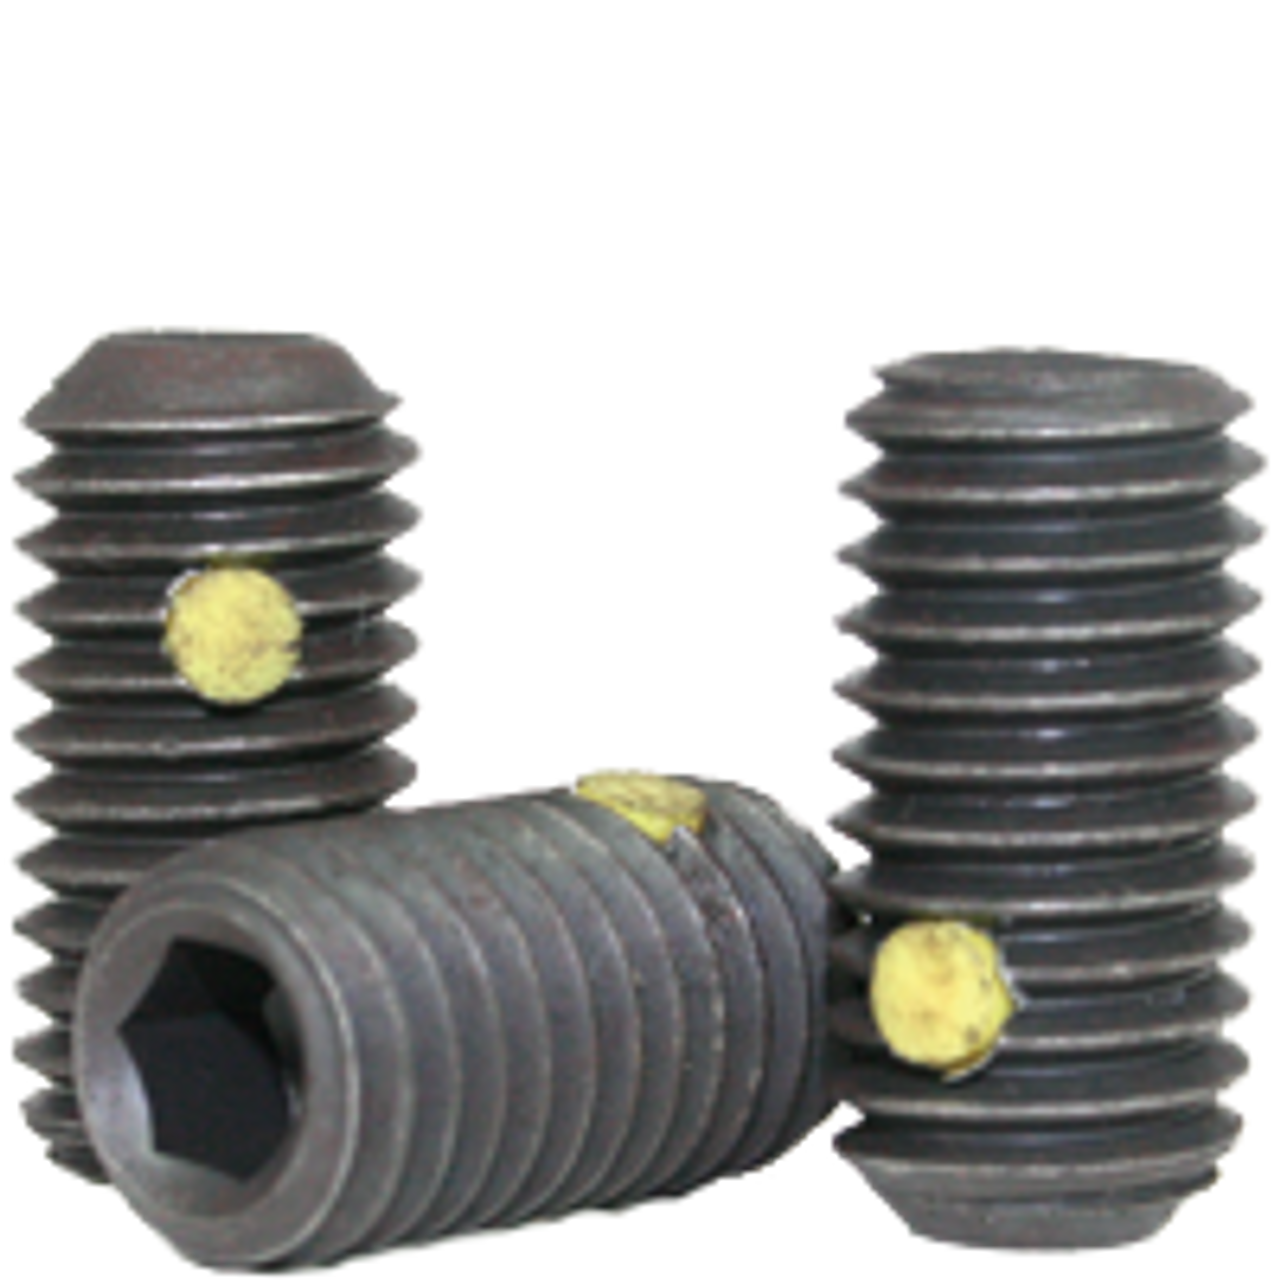 25/Pkg. 7/8 Inch-9x2-1/2 Inch Socket Set Screws Cup Point Coarse Alloy Thermal Black Oxide